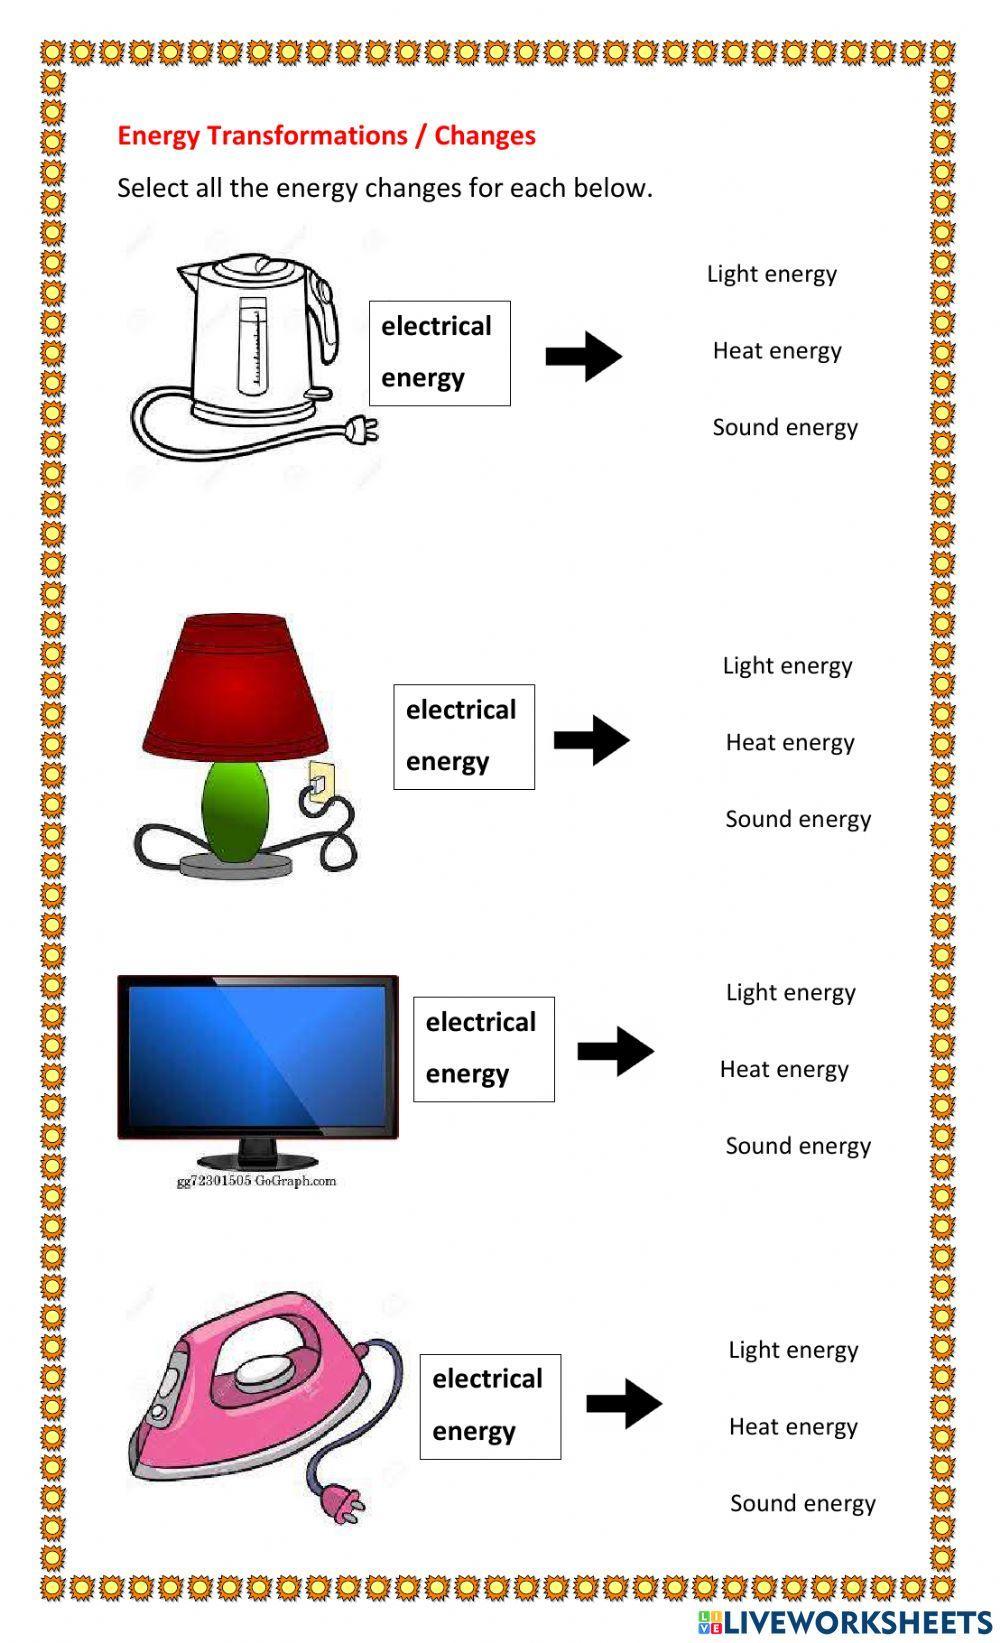 Science - Energy Transformations